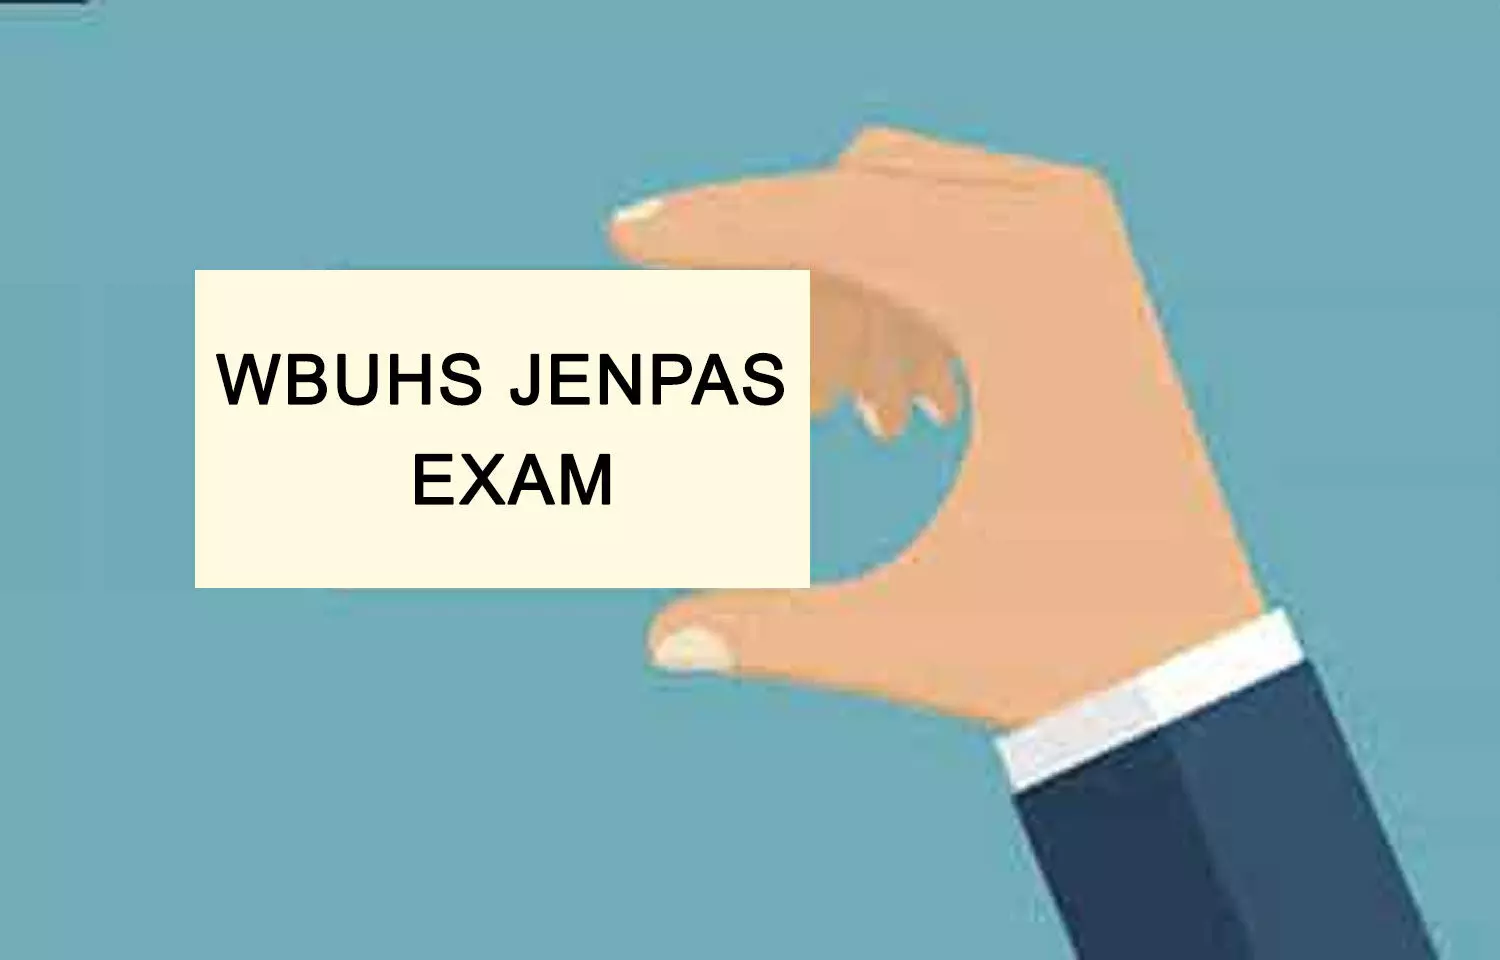 WBUHS informs on WB JENPAS PG 2020 e-Counselling for admission to Fellowship, Diploma, Paramedical courses